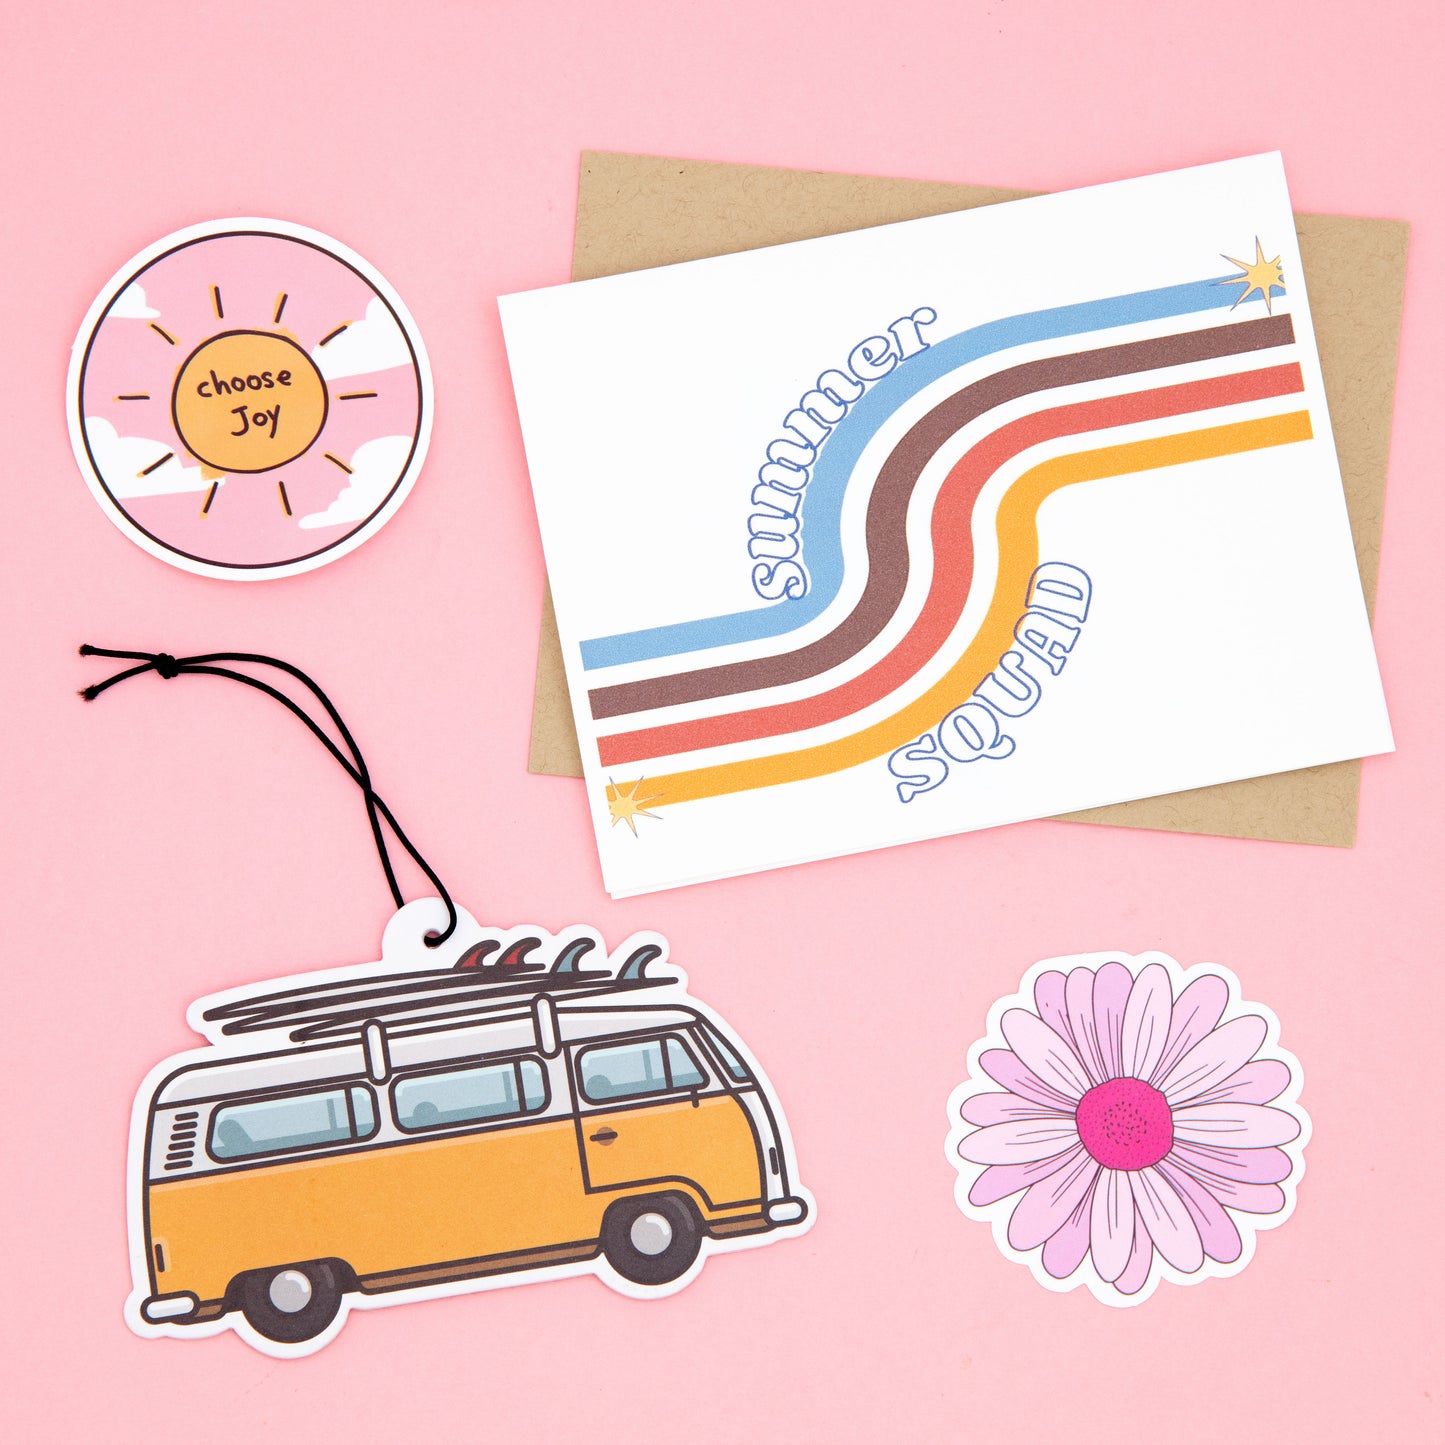 Soak up the sunshine with our summer-inspired subscription box! Inside, you'll find a chic pair of sunglasses, a colorful beach towel clip set, a refreshing sweat wipe, and a trendy summer squad greeting card. Get ready for endless fun in the sun with our sunny-themed essentials!